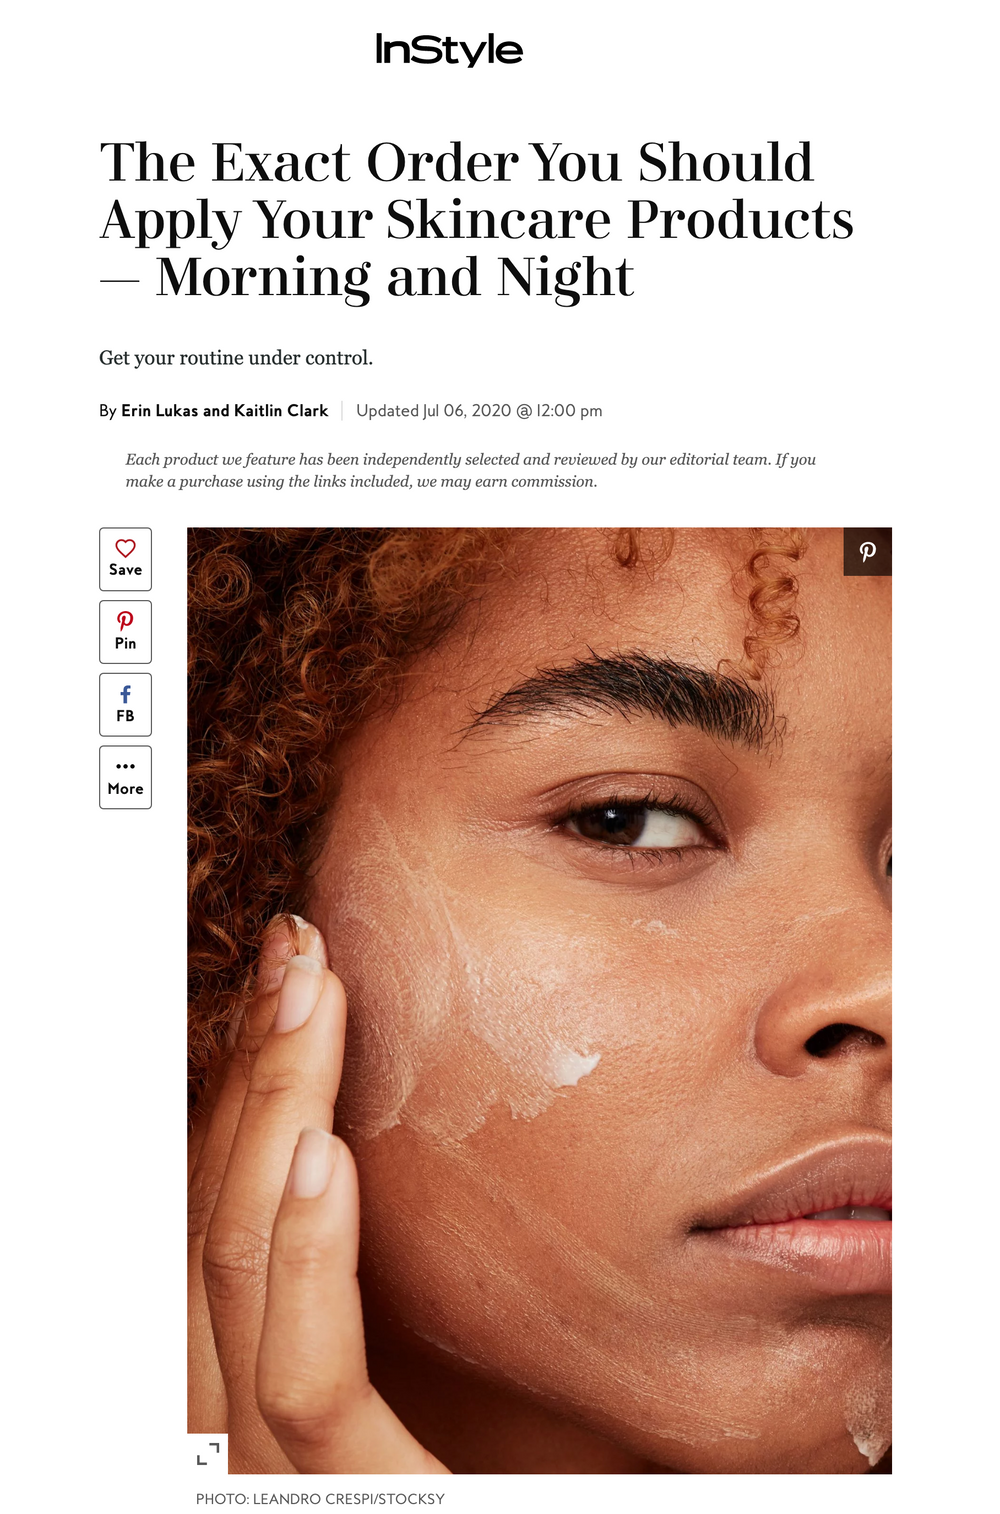 InStyle: The Exact Order You Should Apply Your Skincare Products — Morning and Night